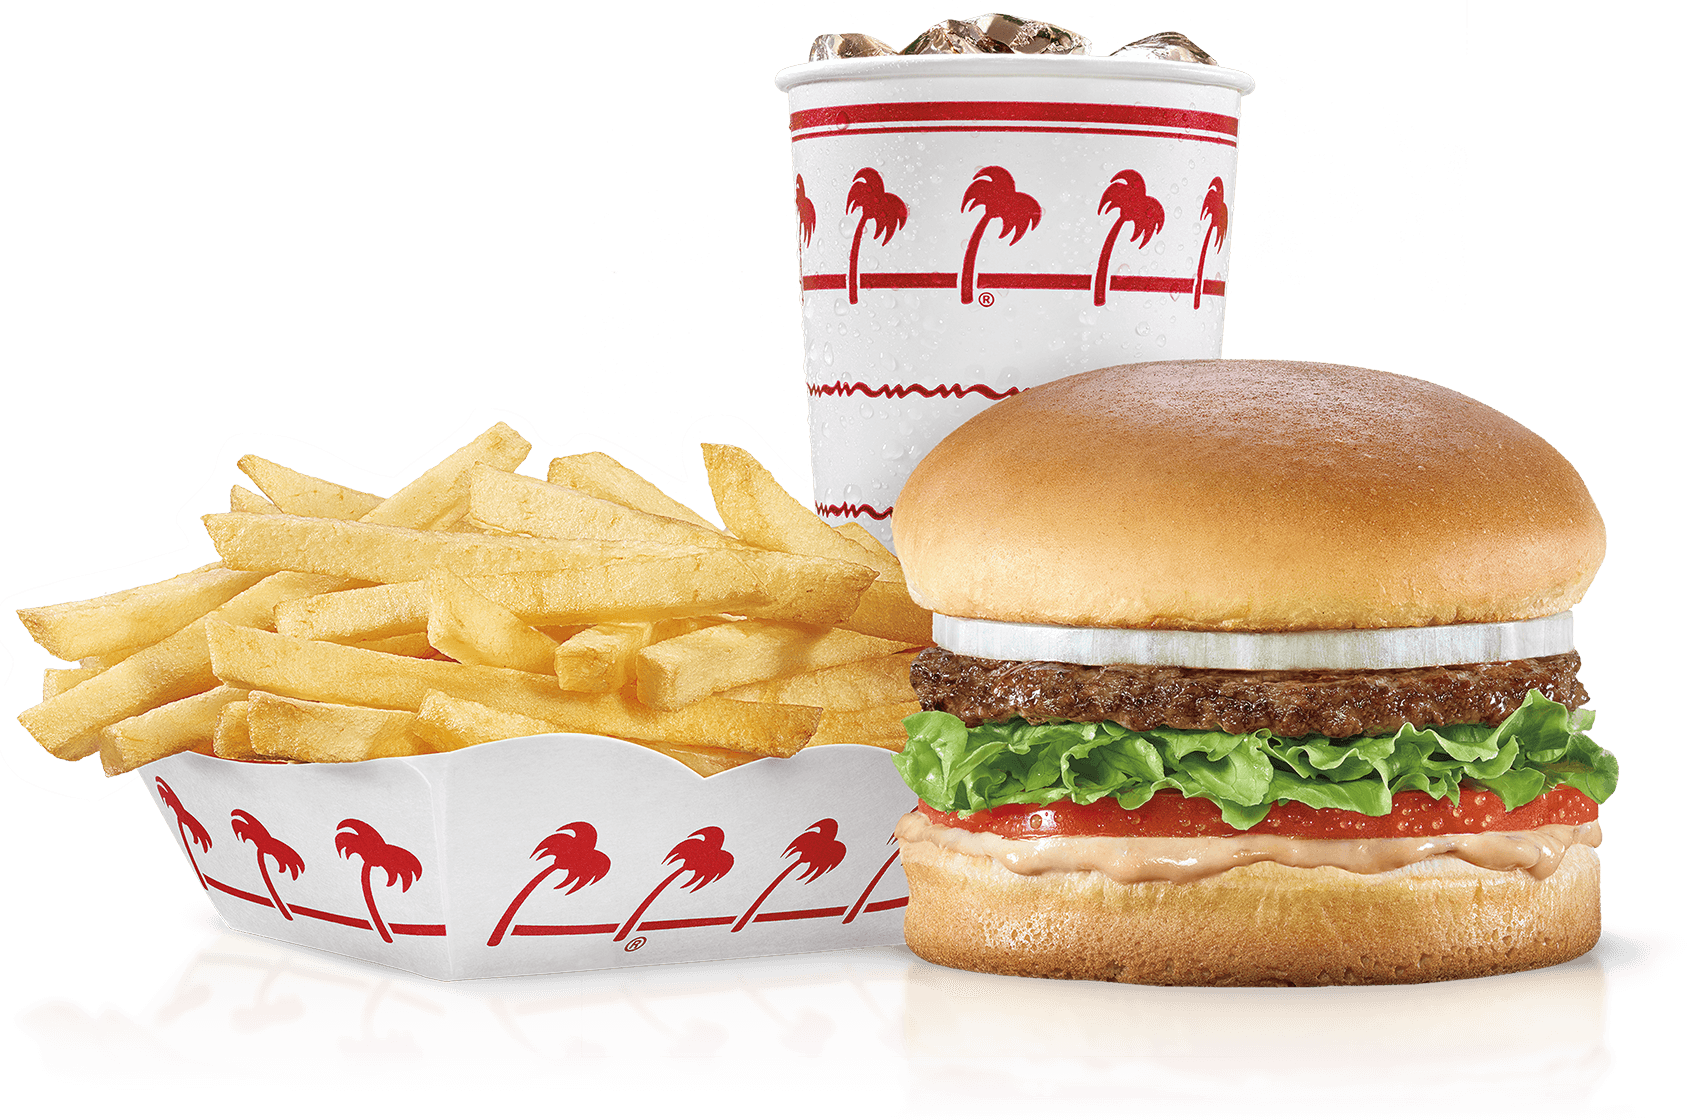 Fast Food Combo Meal.png PNG